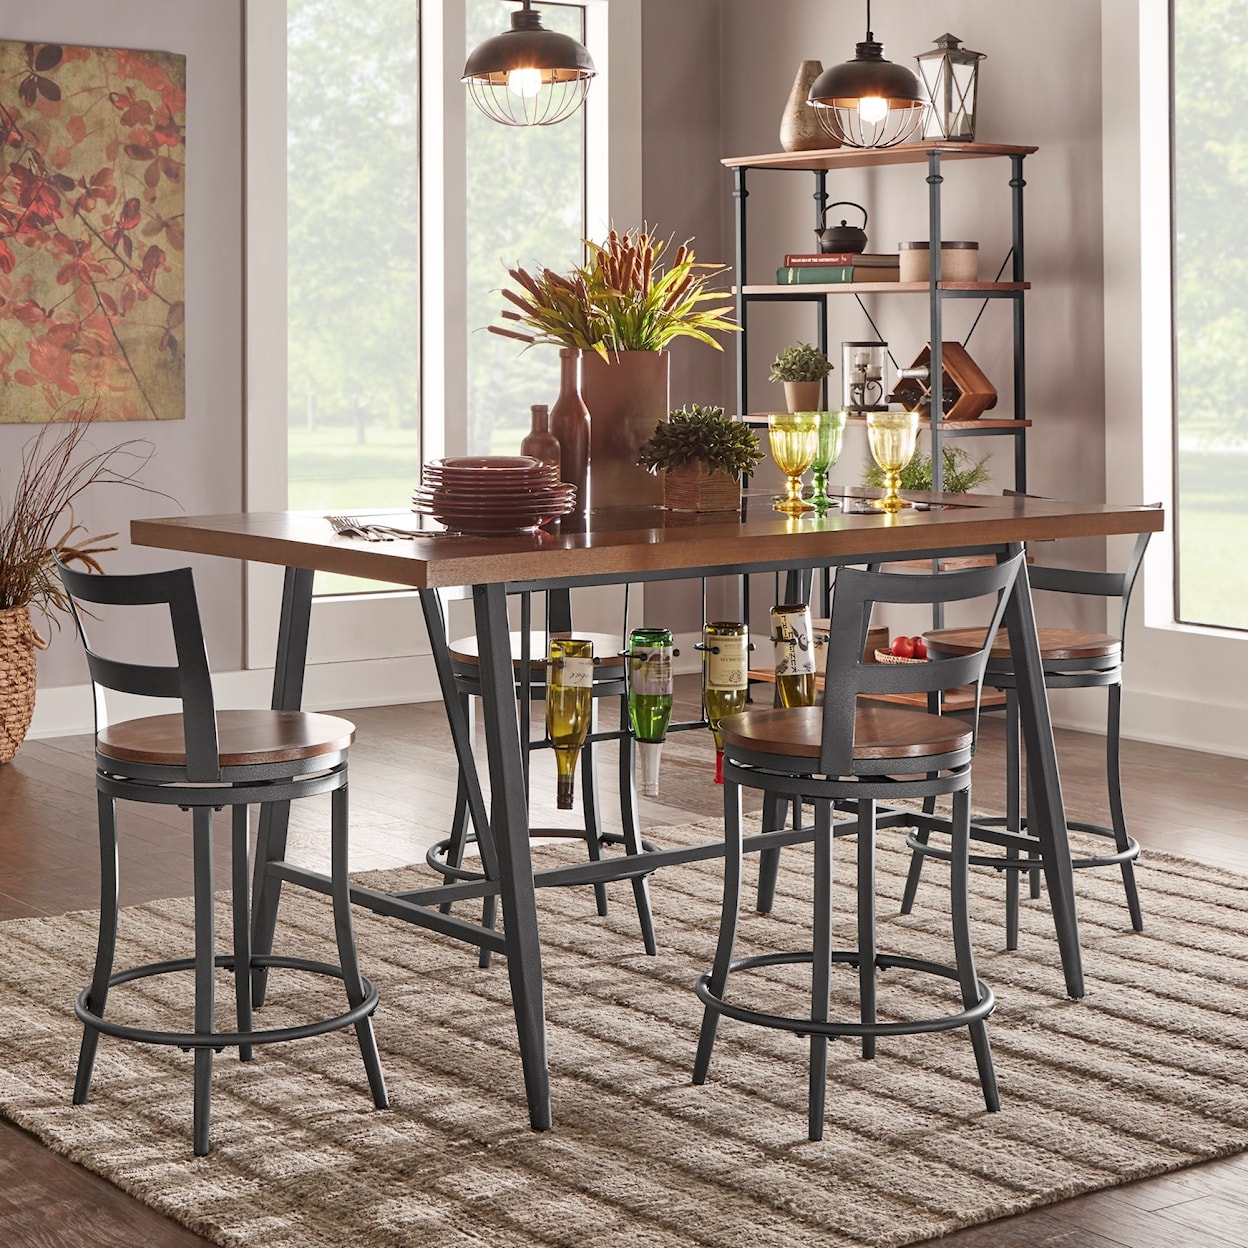 Homelegance Selbyville Counter Height Table and Chair Set